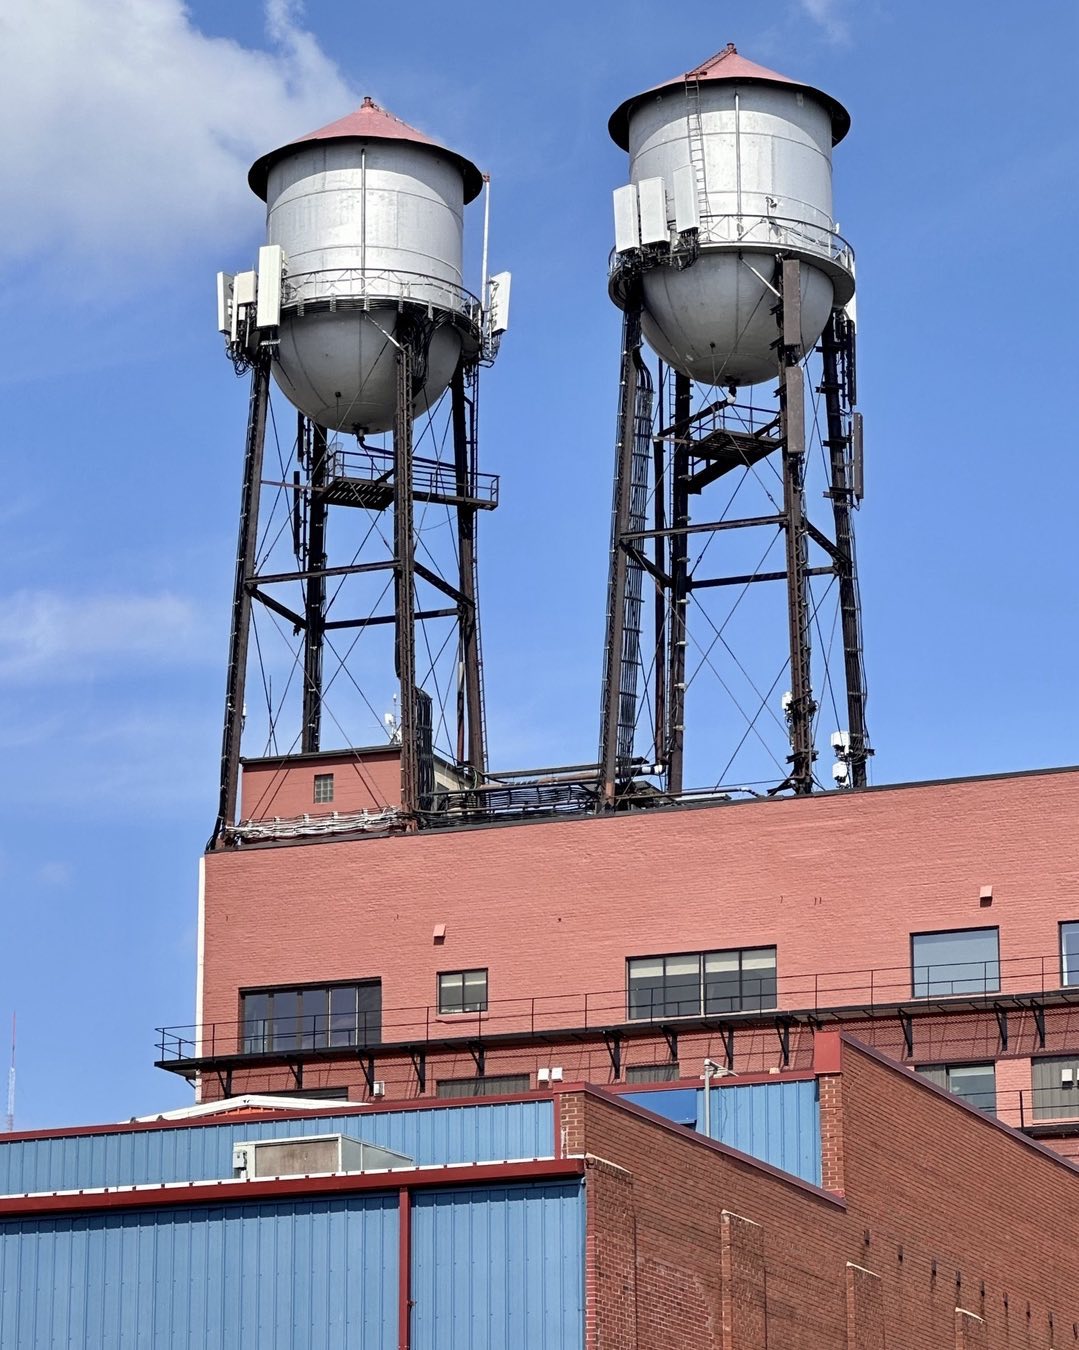 The skyline of Duluth, MN is marked by all sorts of roof top devices like these water towers. In recent years much of the industrial waterfront has been replaced by shops, restaurants, bars and other tourist related enterprises. We enjoyed our overnight Sprinter stay in the Lincoln Industrial Park Area. #duluthminnesota #minnesotaphotography #duluthphotography #watertanks #skylineofduluthminnesota #orcuttphotography